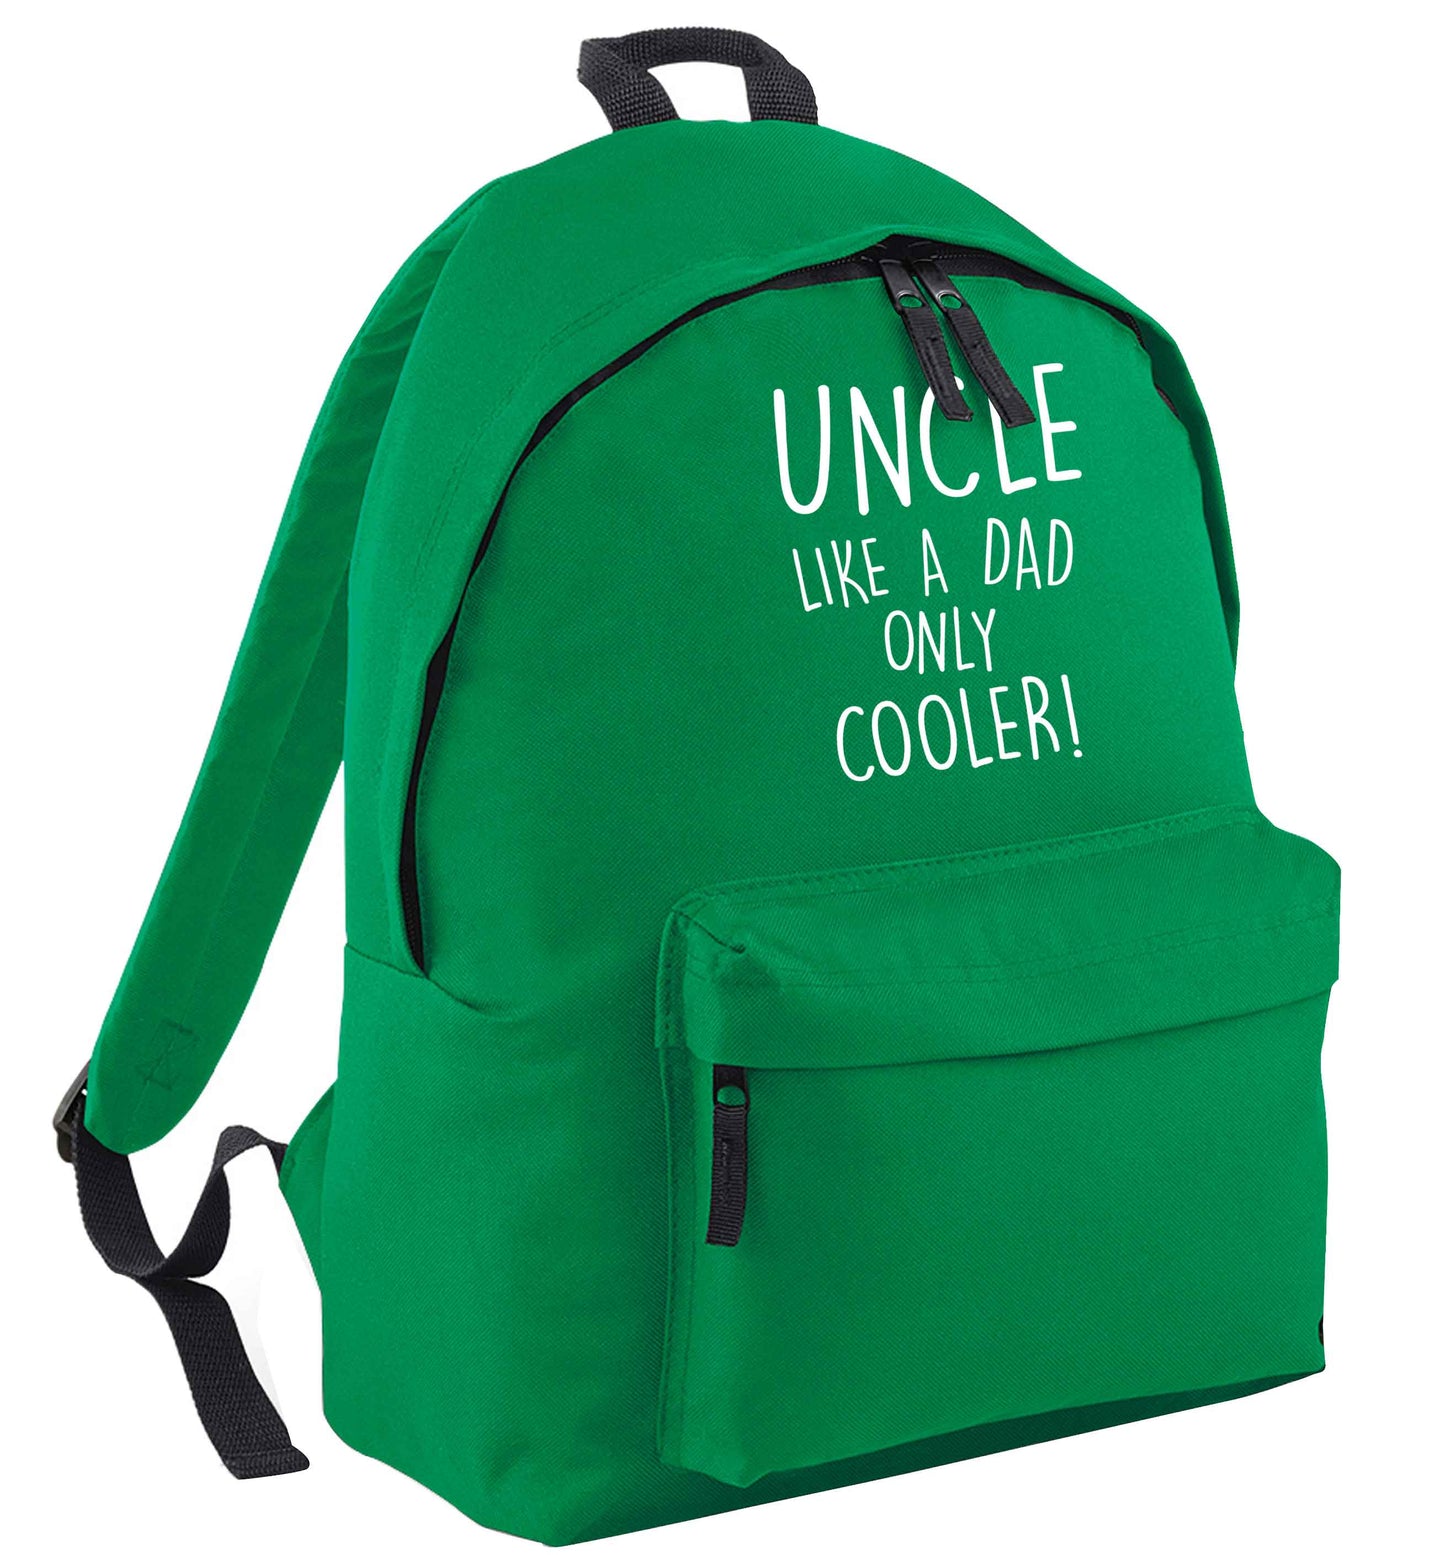 Uncle like a dad only cooler green adults backpack